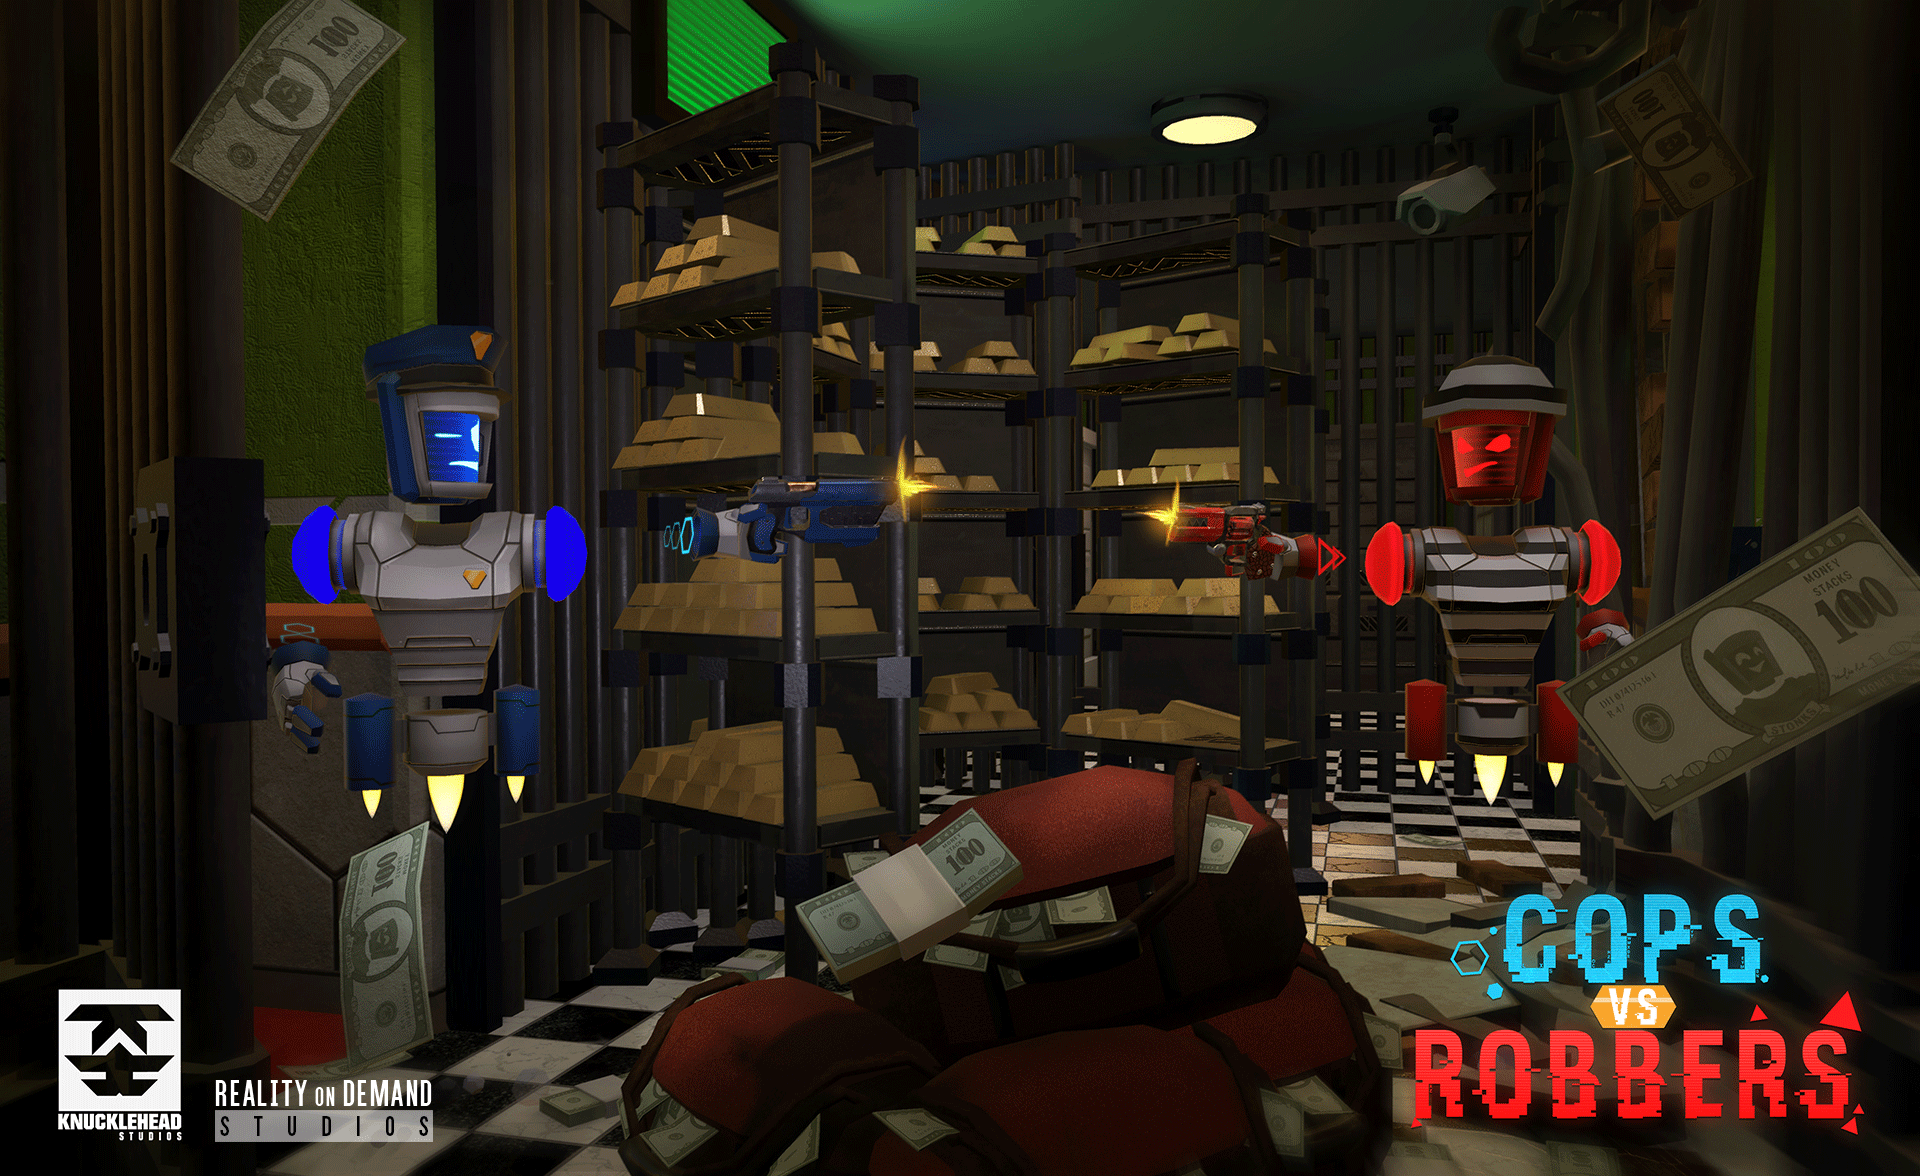 Cops Vs Robbers Free Roam Virtual Reality Available For Lbvr Licencing